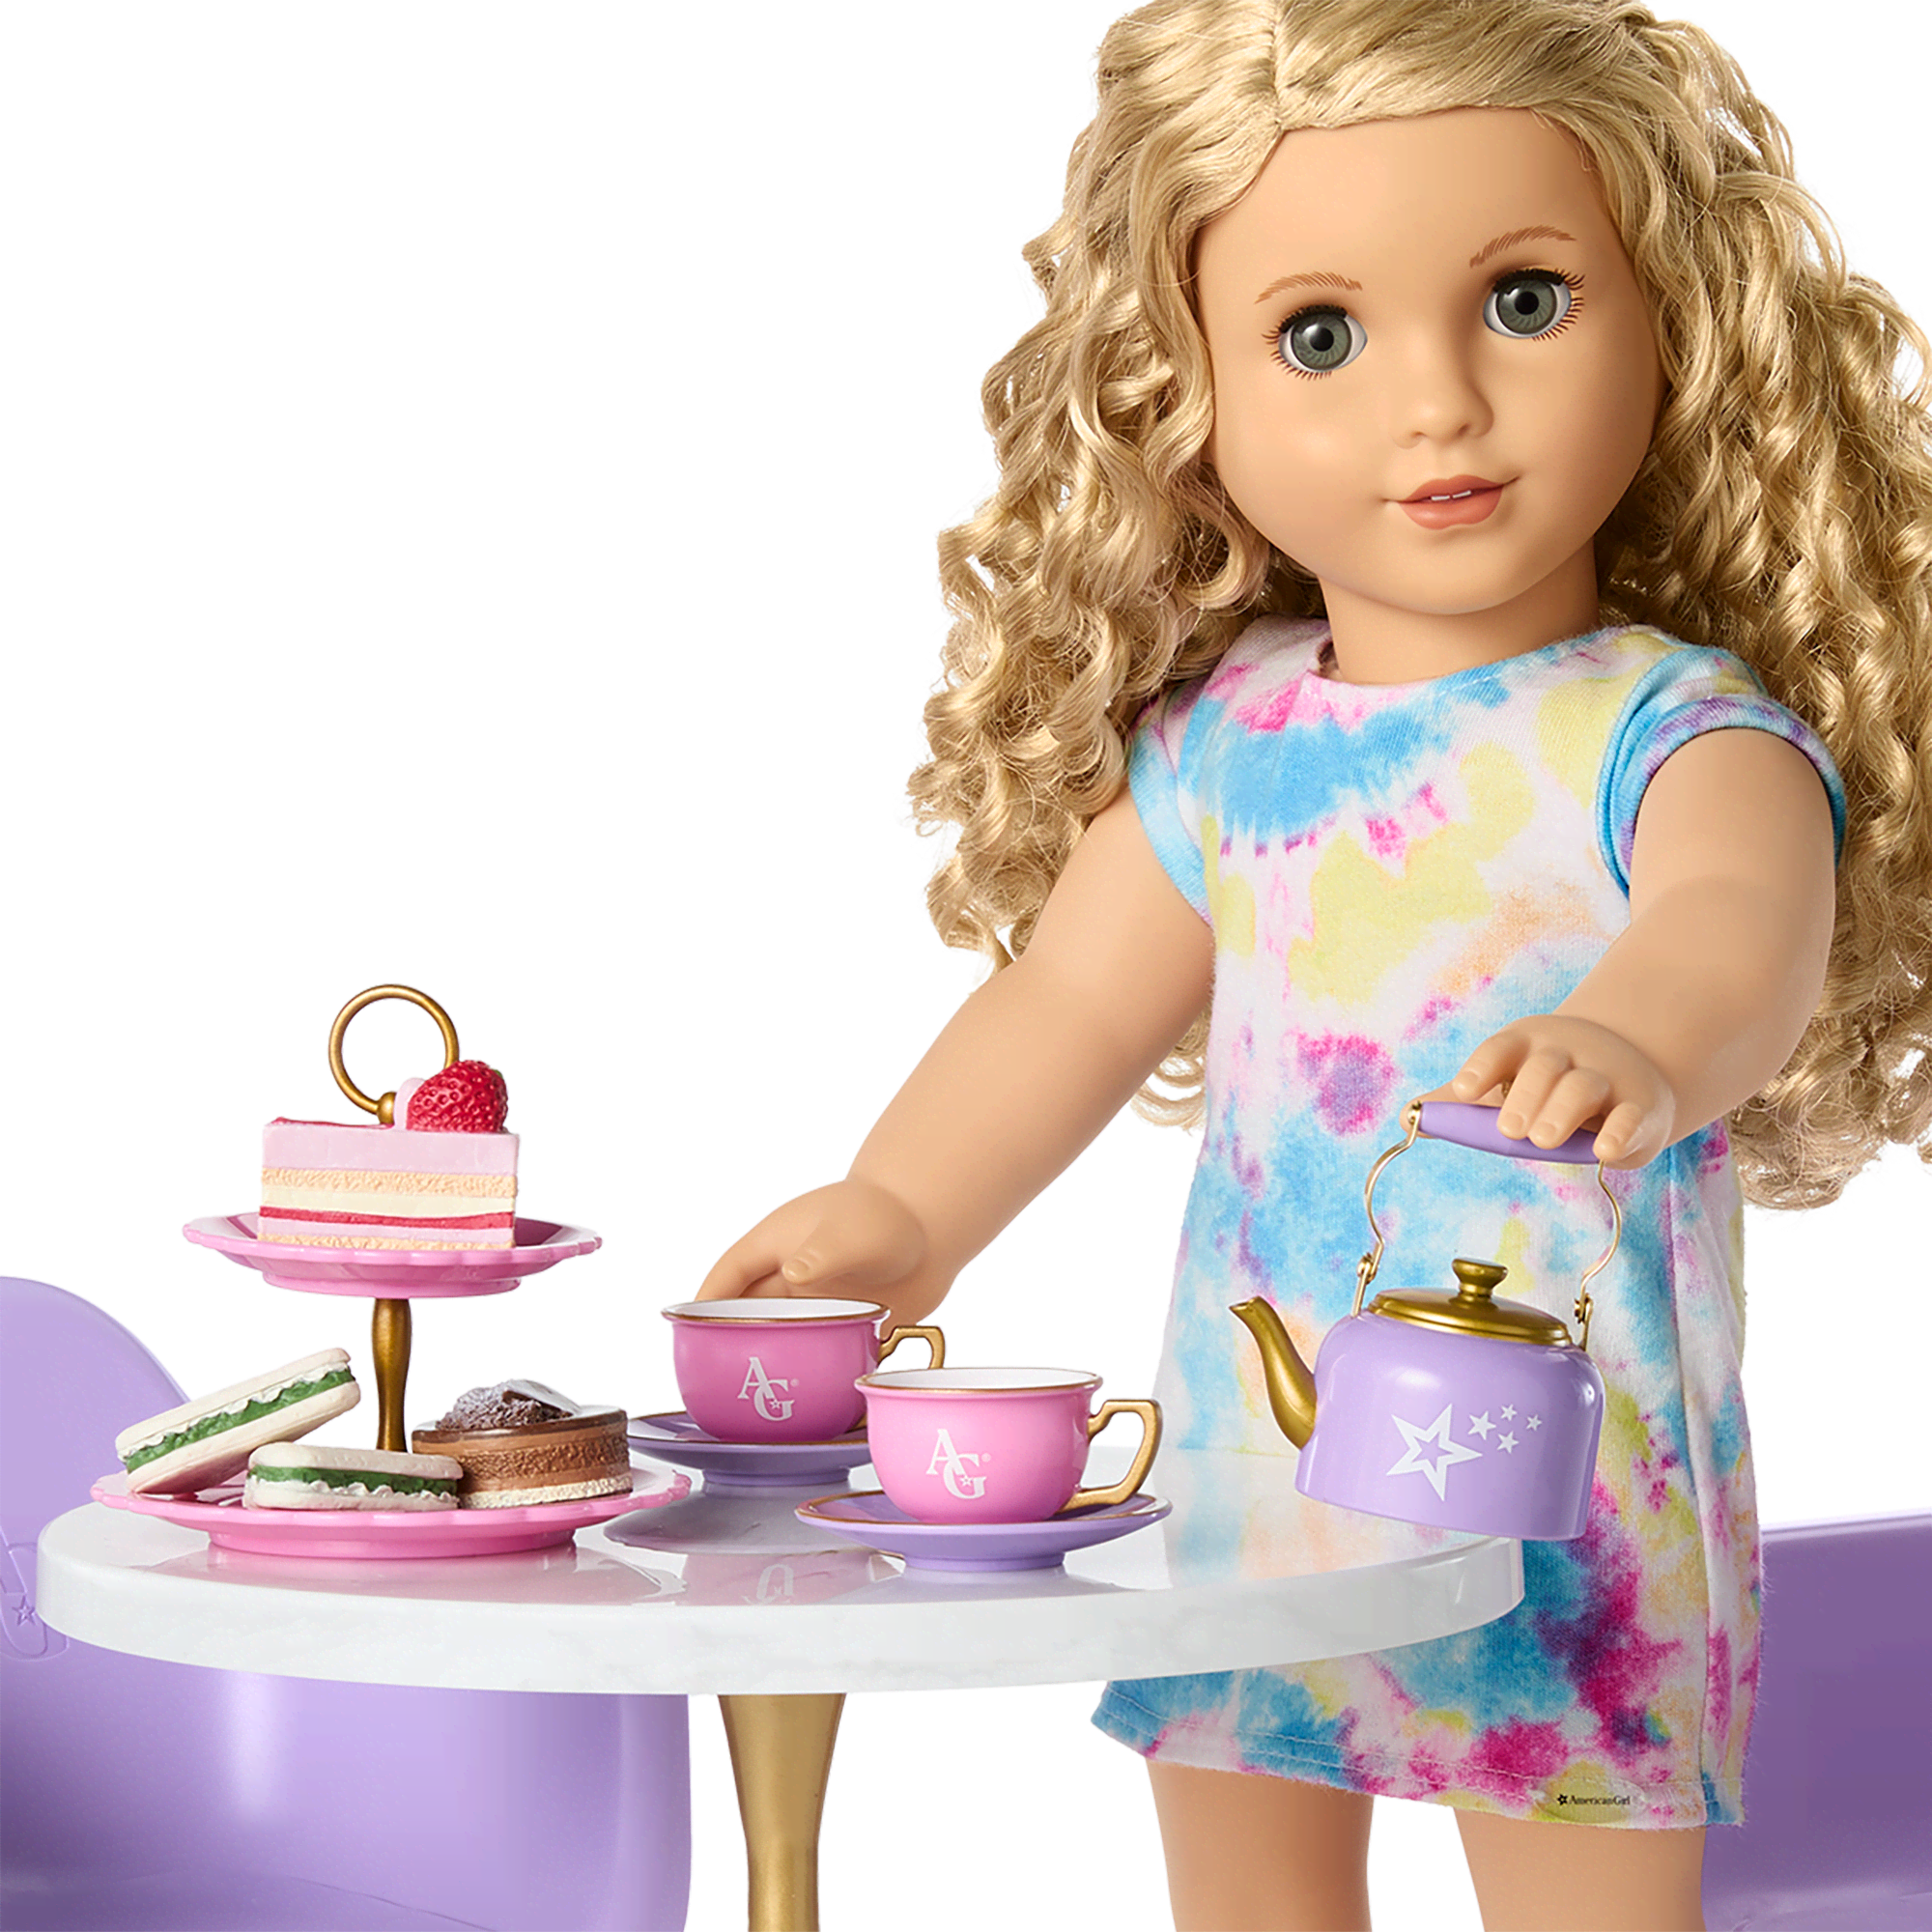 Tea for Two Set for 18-inch Dolls